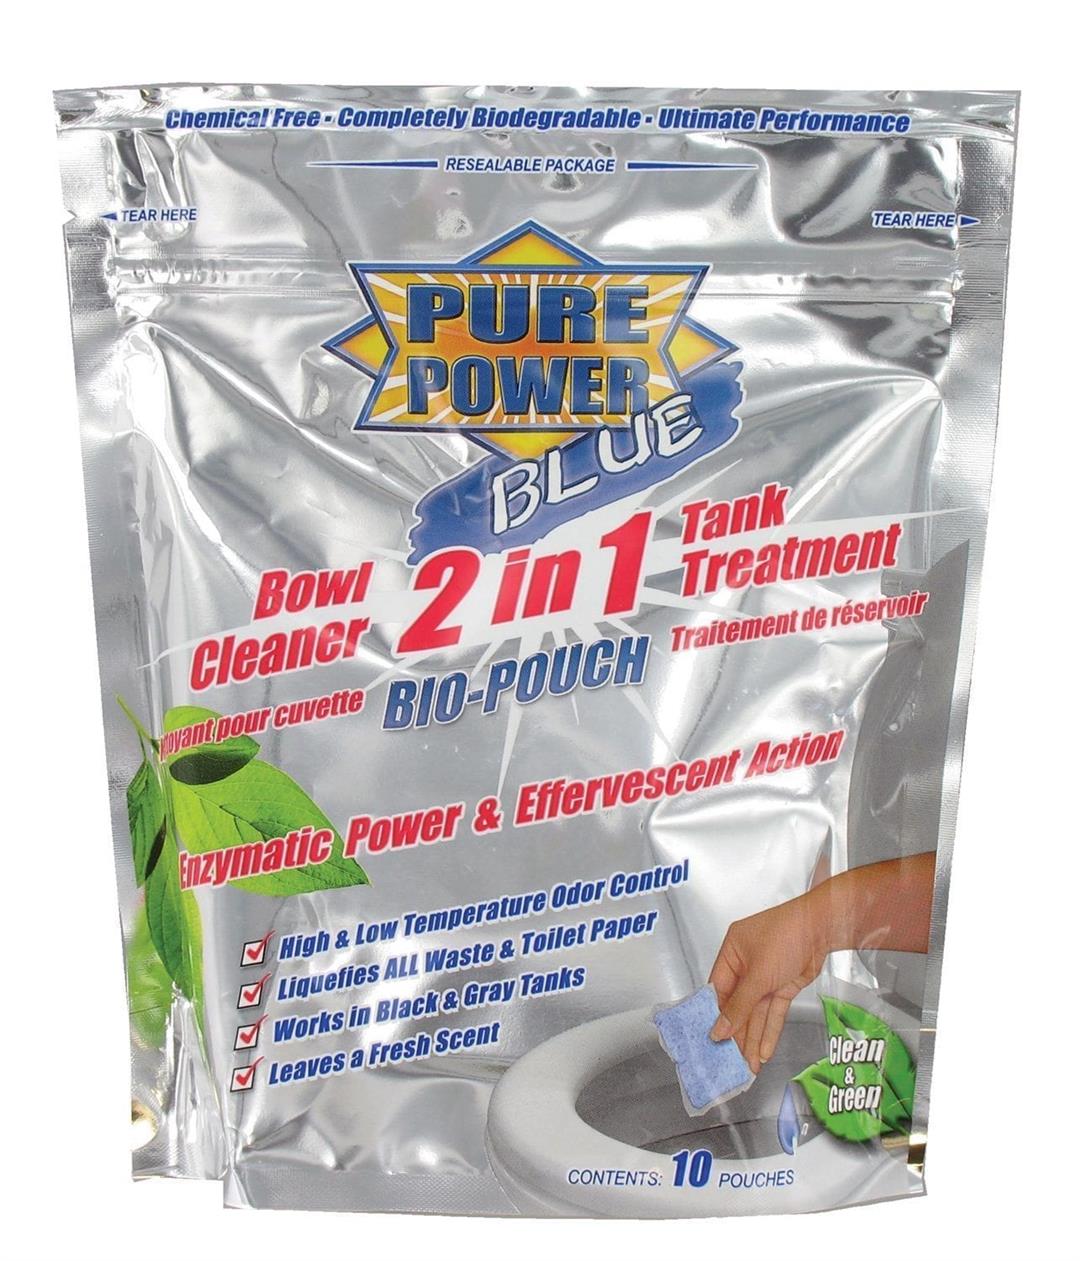 Valterra V23020 Pure Power Blue Bio-Pouch 2-In-1 Bowl Cleaner & Tank Treatment, 12/pk